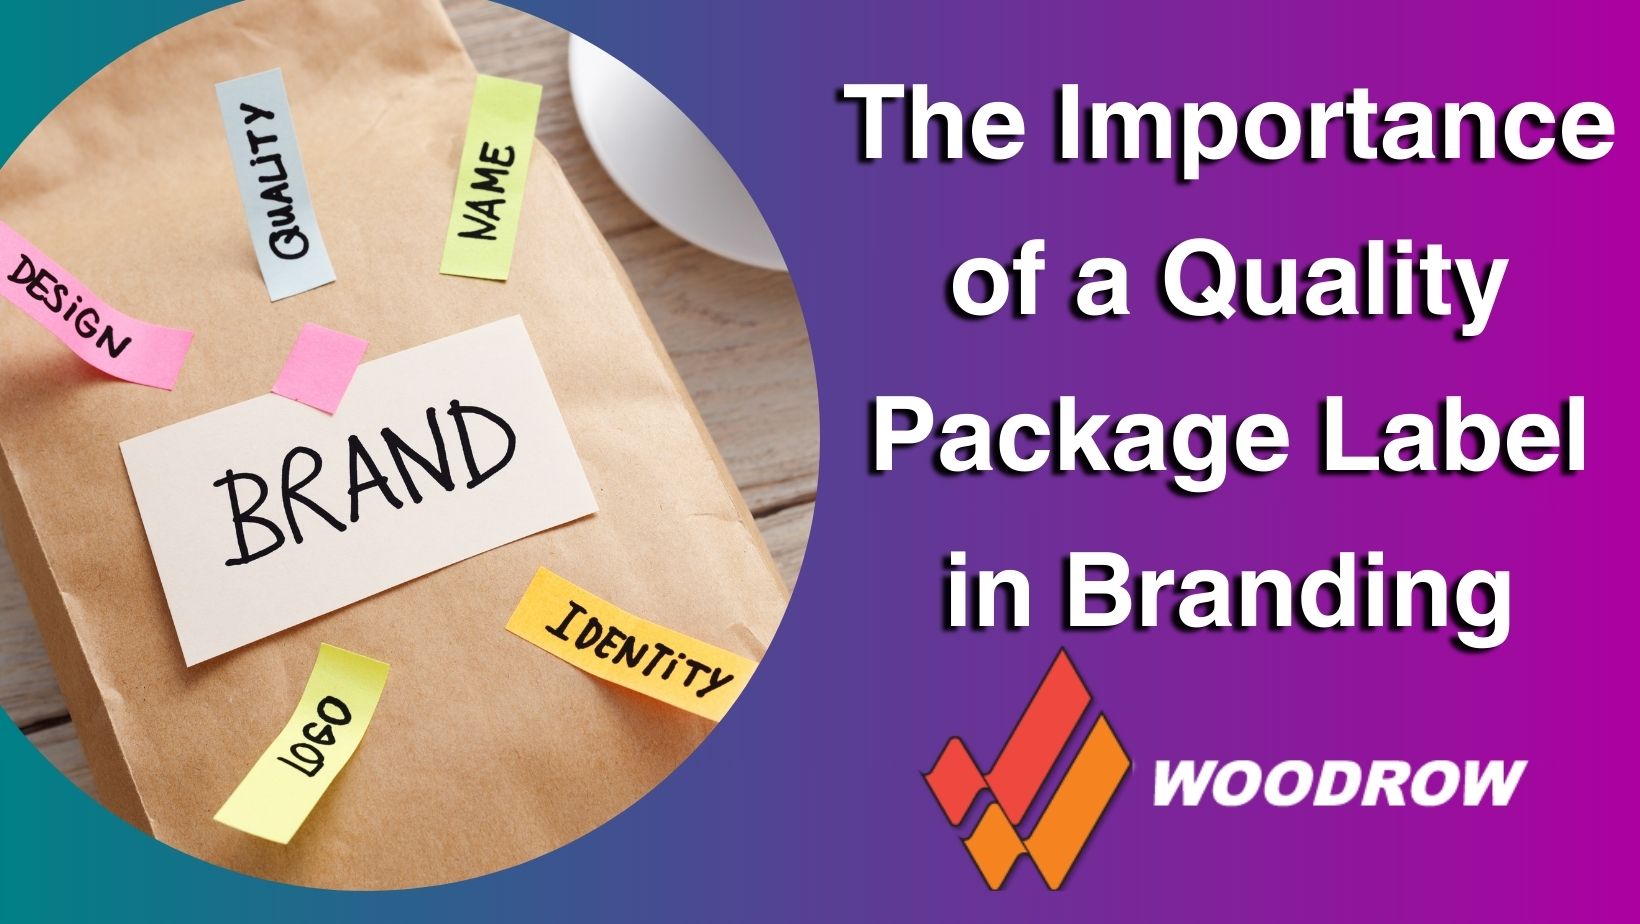 The Importance of a Quality Package Label in Branding